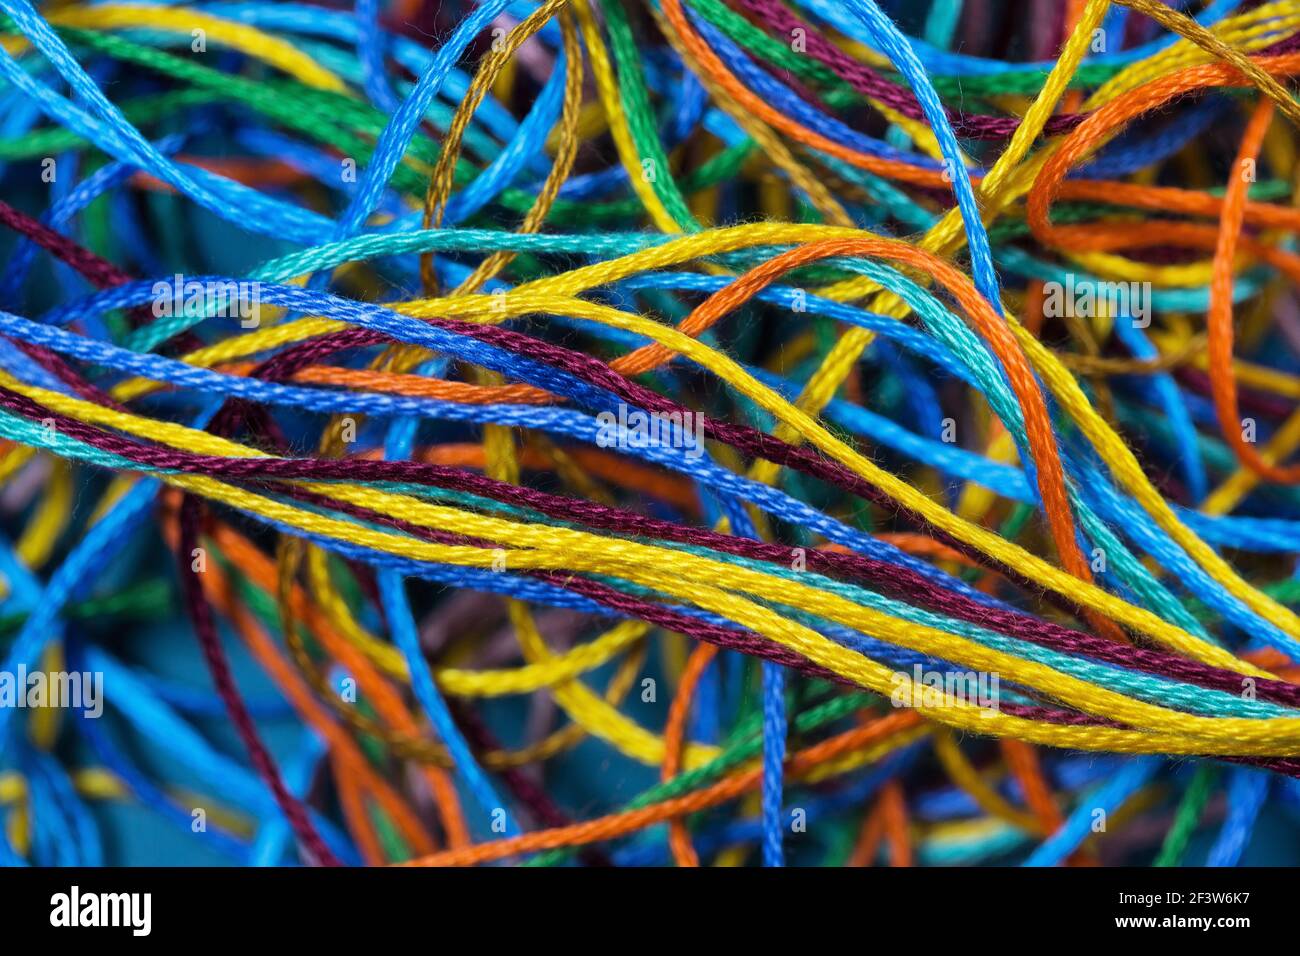 A bundle of brightly colored strings Stock Photo - Alamy